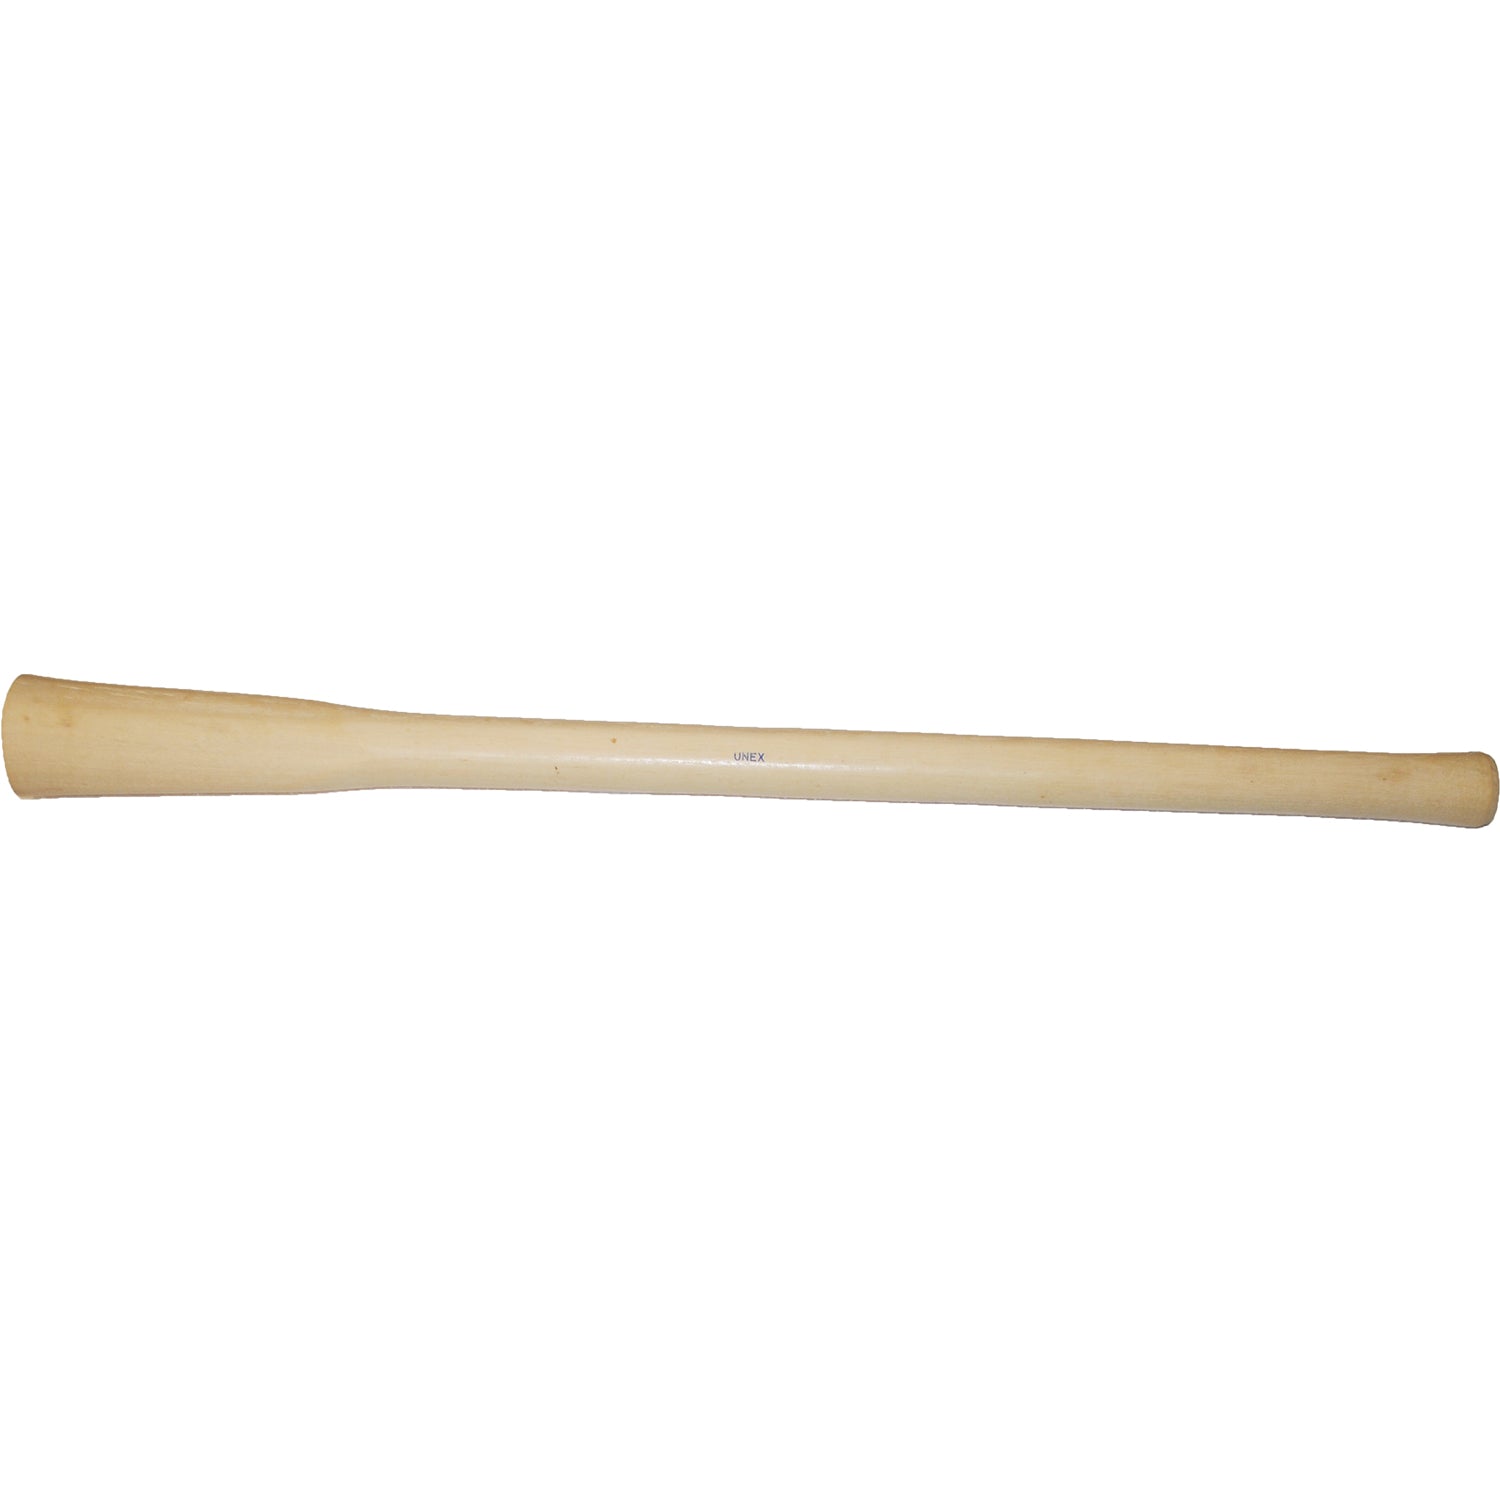 American Hickory Pick Handles 36" Hand Tools - Cleanflow